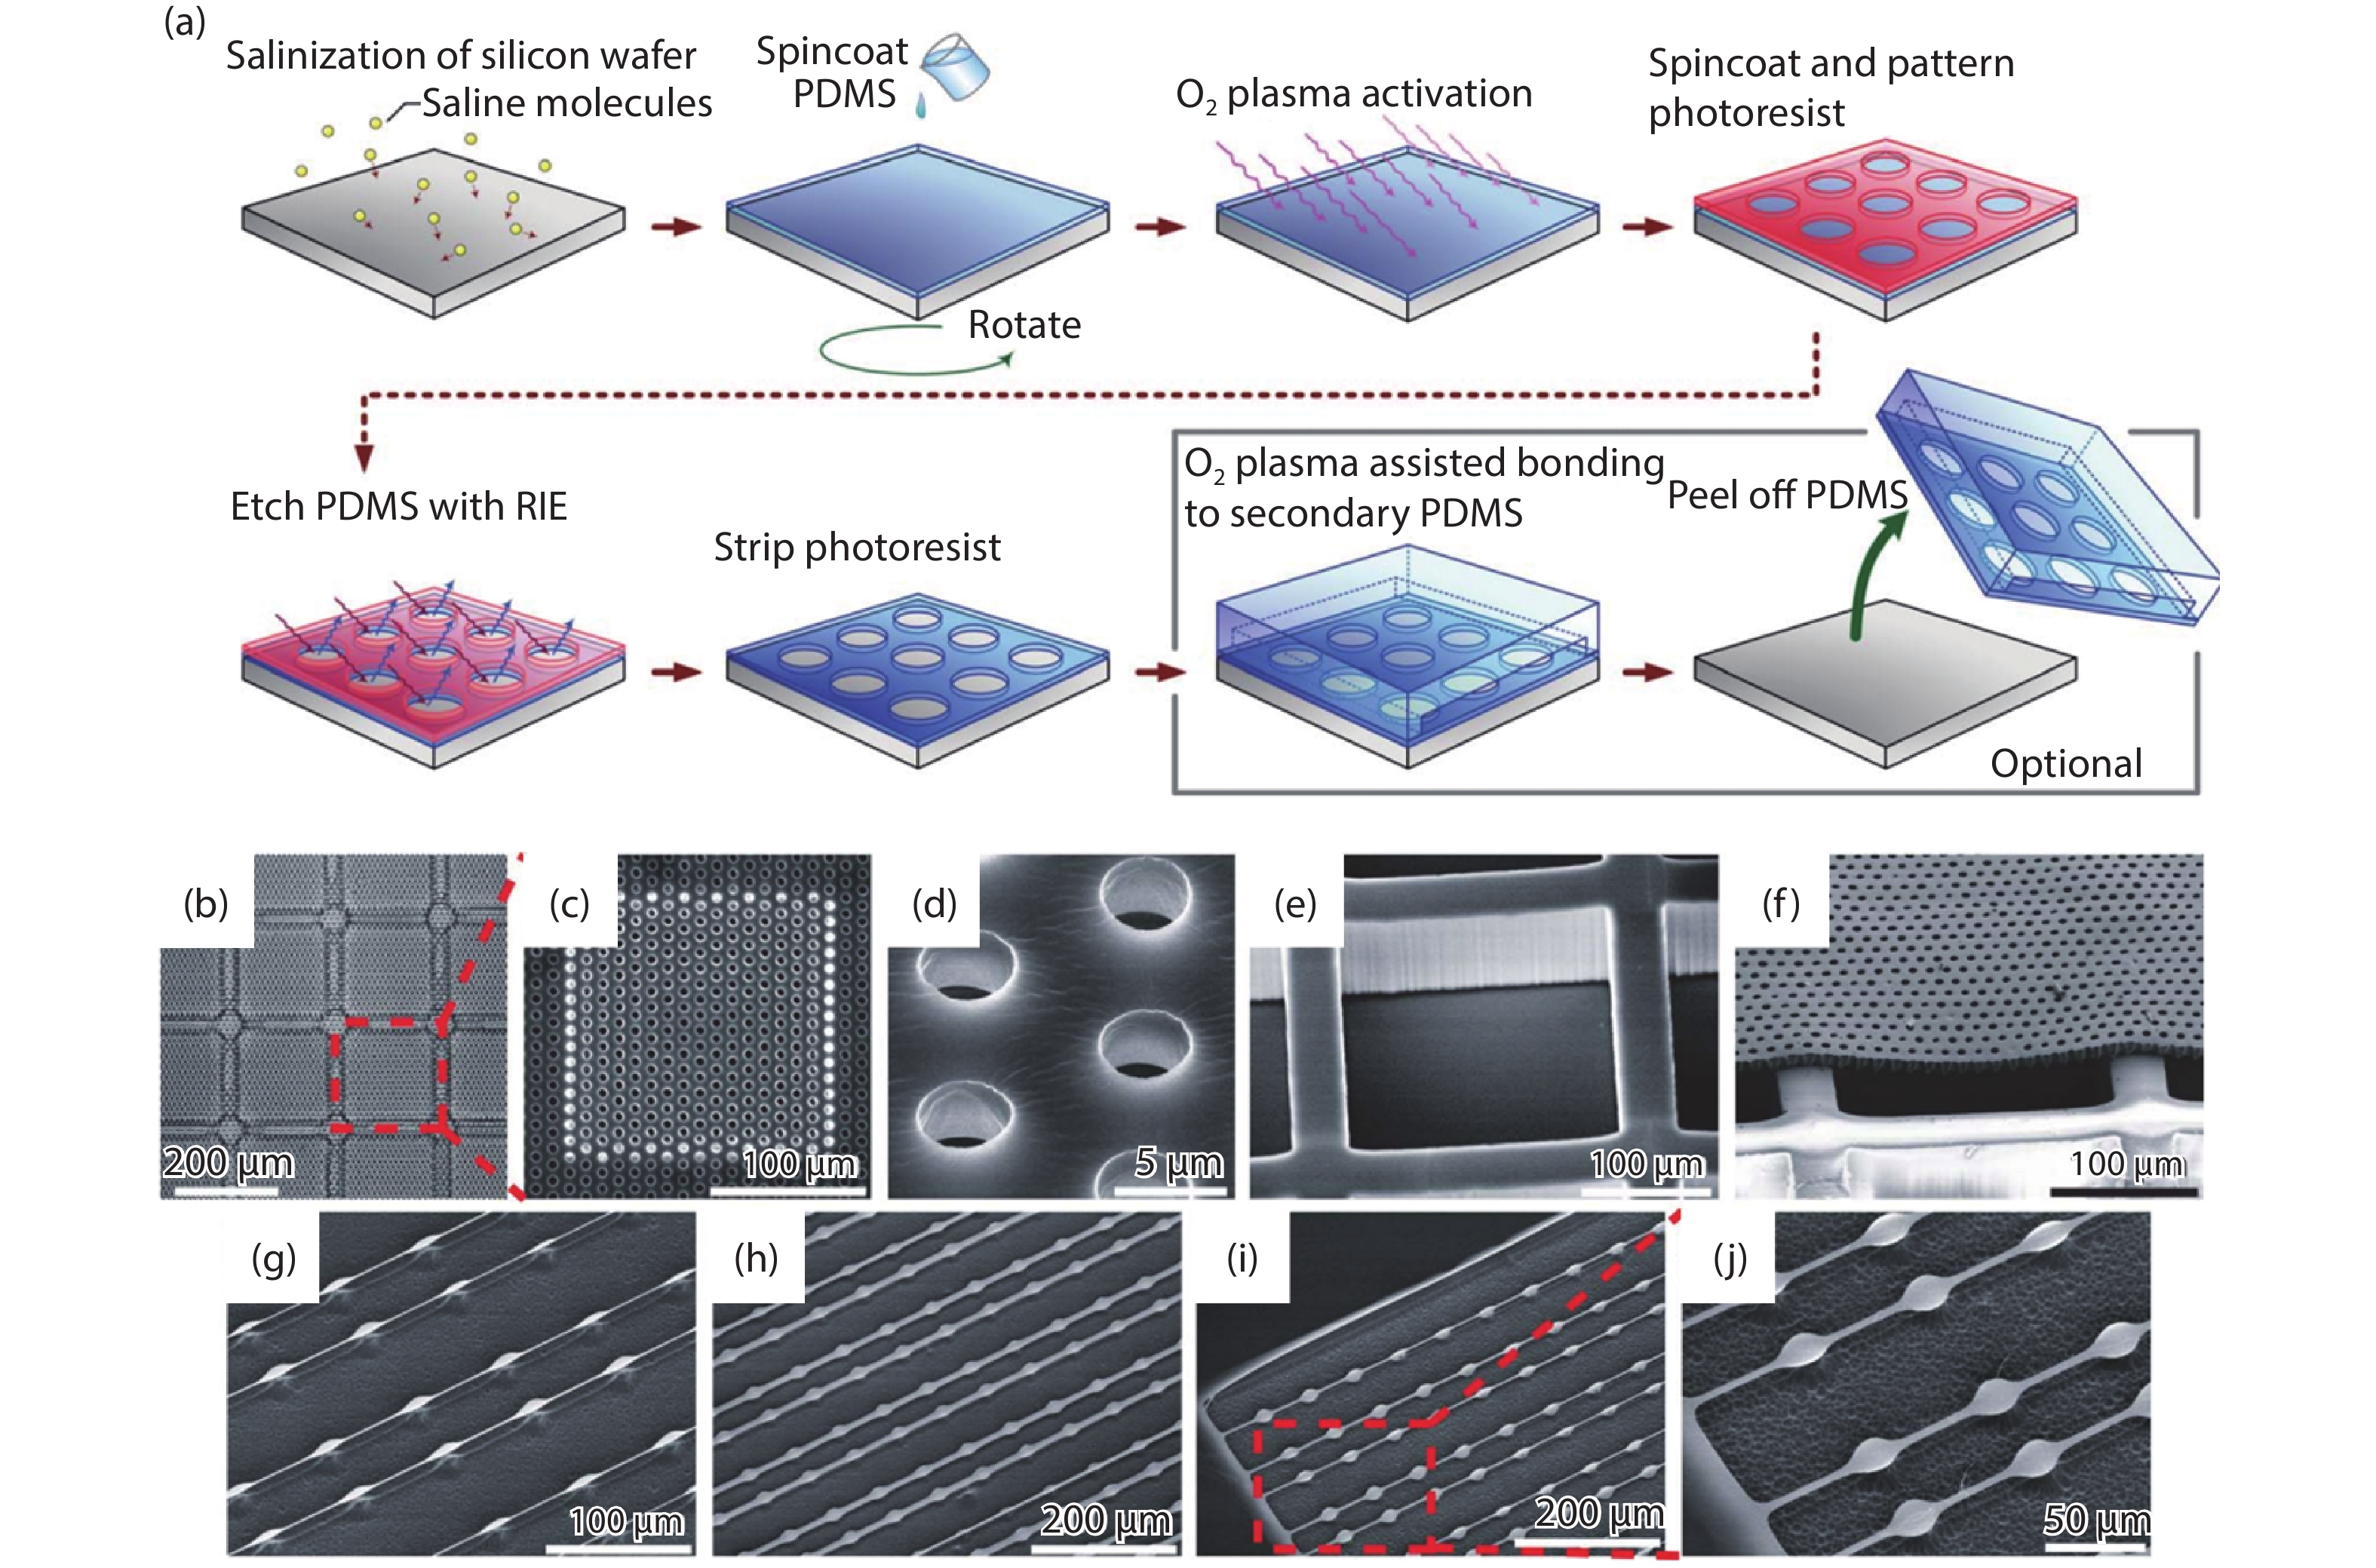 (Color online) Lithographic surface micromachining of PDMS. (a) Schematic illustrations of photolithographic surface micromachining of PDMS. (b–j) Free-standing PDMS microfiltration membranes and beam structures. (b–f) SEM images of the microstructured PDMS membrane bonded to (e) a PDMS support structure. The membrane had a thickness of 10 μm, and it contained an array of hexagonally spaced through-holes (with a hole diameter of 4 μm). (g–j) Free-standing PDMS beam structures on Si wafer substrates, with the beam thickness of 500 nm and a total beam length of 800 μm. The minimum beam widths were (g) 2 μm, (h) 10 μm, and (i, j) 5 μm, respectively. (Reprinted from Ref. [51]. Copyright 2012 The Royal Society of Chemistry.)